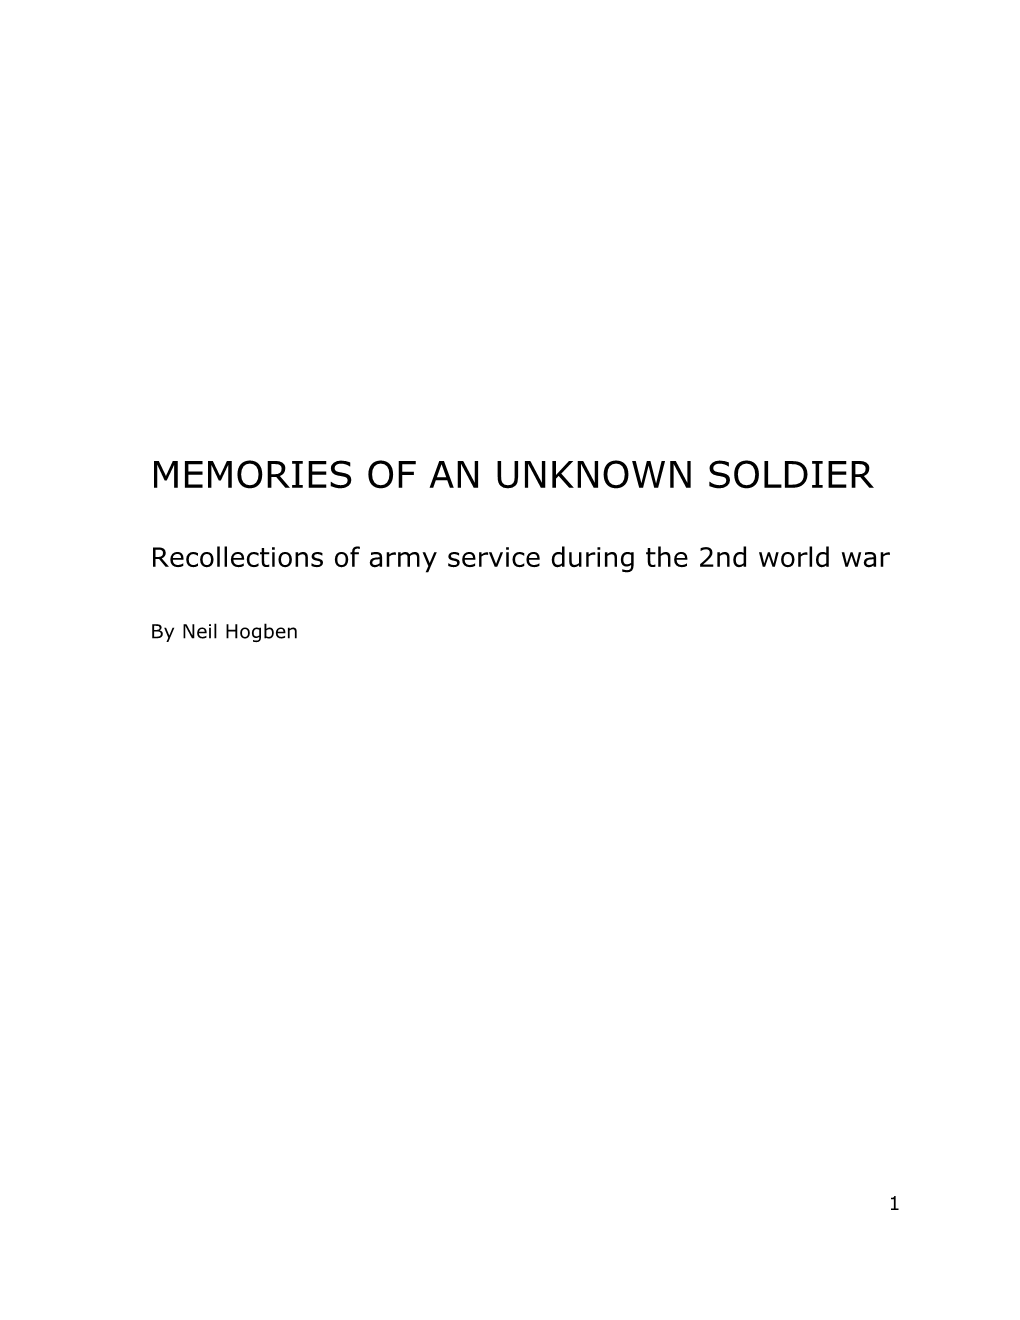 Memories of an Unknown Soldier